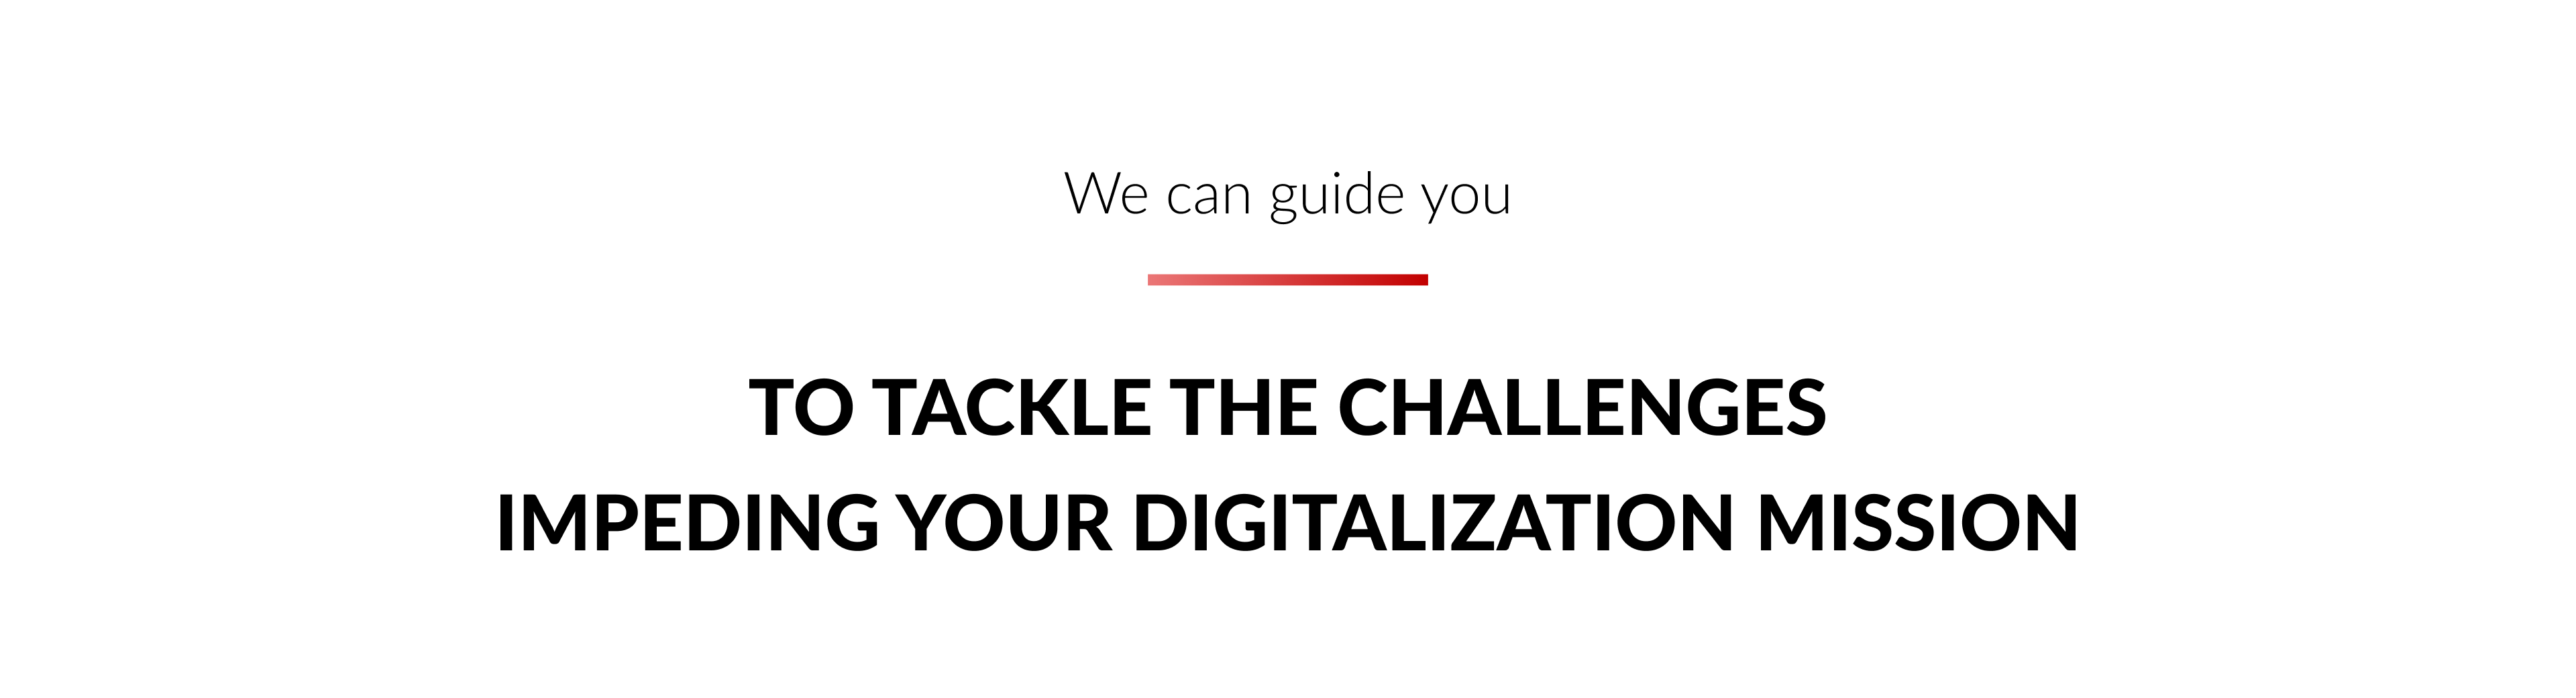 ITC can guide you to tackle the challenges impeding your digitalization mission in China